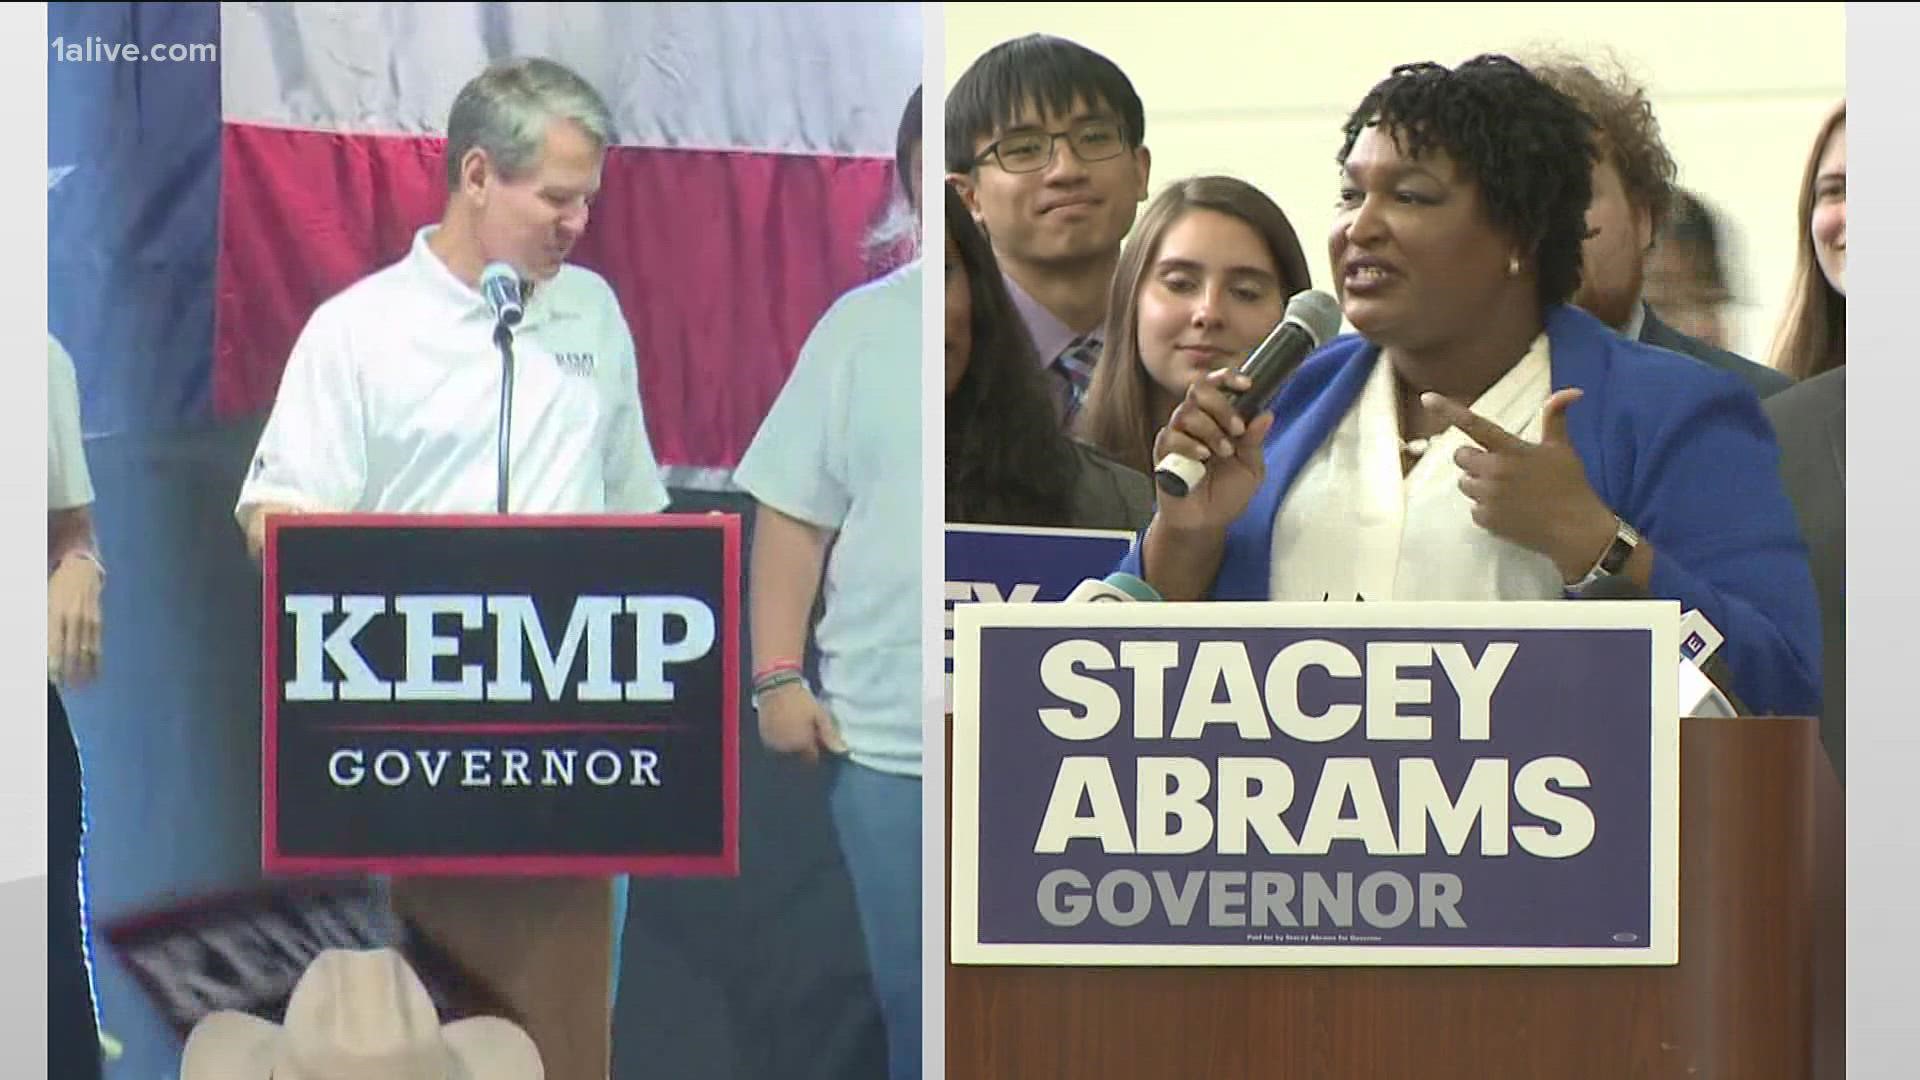 Democrat Stacey Abrams has announced she is making another run to become governor of Georgia.